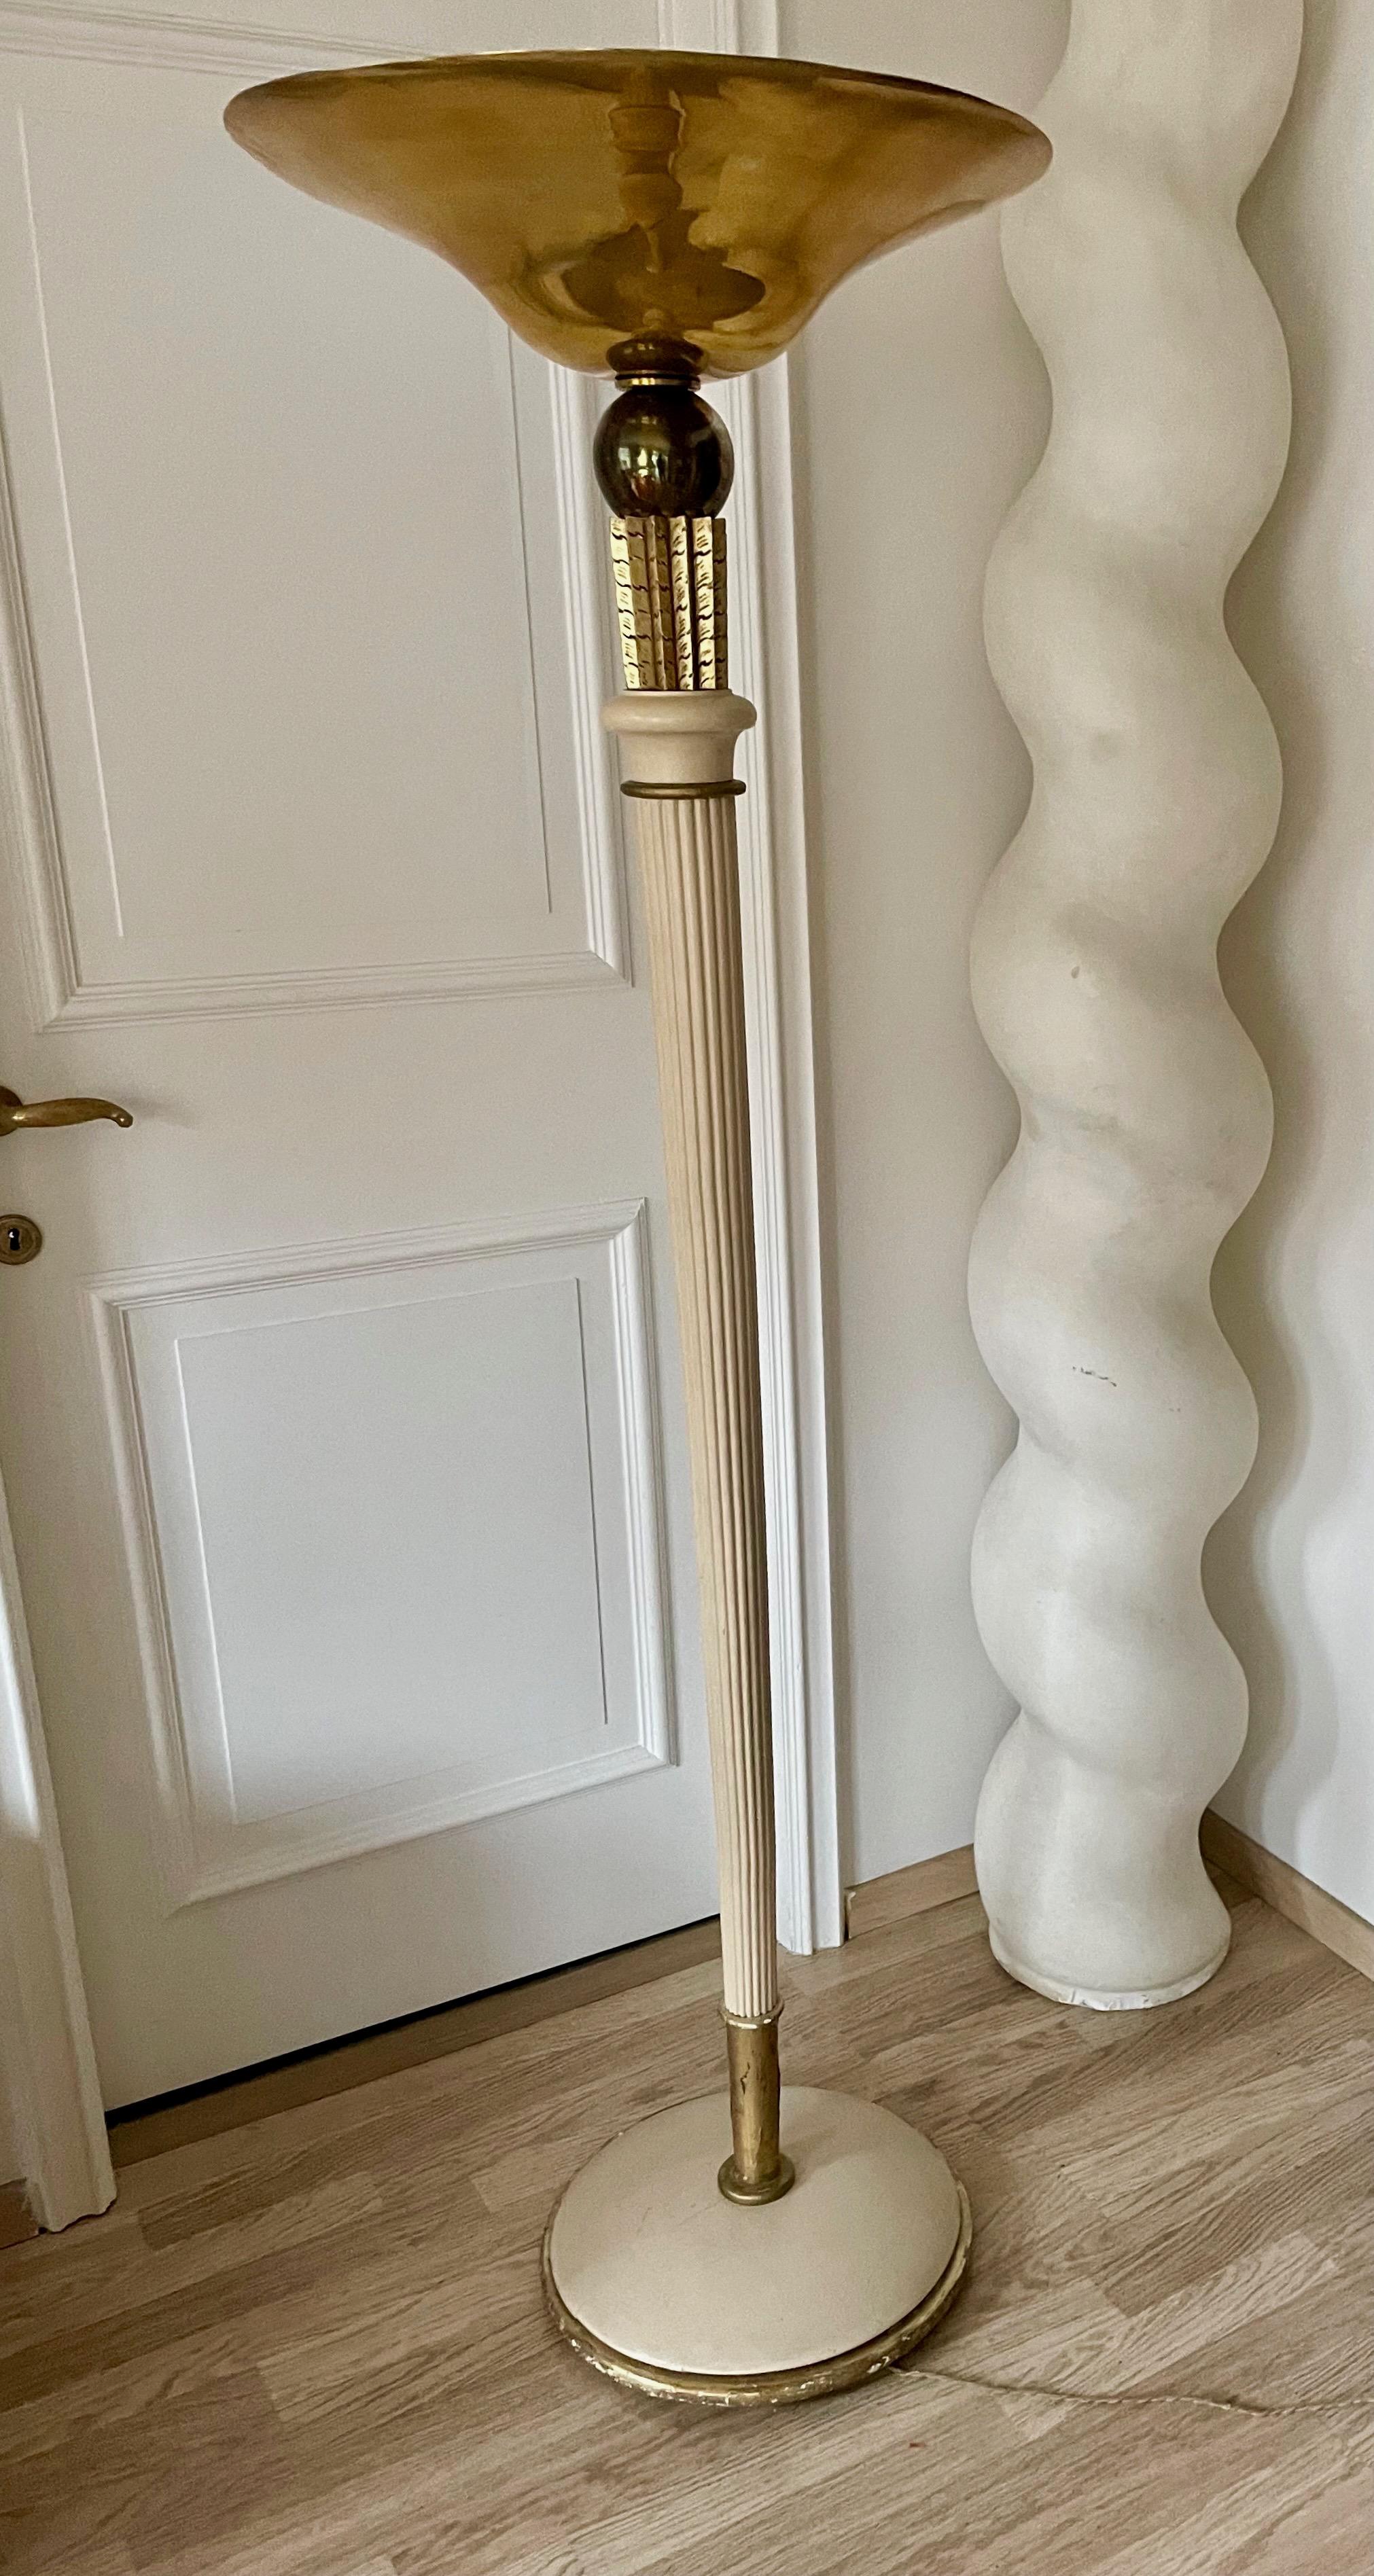 Cream lacquered wood art deco floor lamp symbolizing a quiver and its
arrows with on top a large brass reflector.
One light and gold leaves accents.
Attributed to Maison Dominique, France 1935.